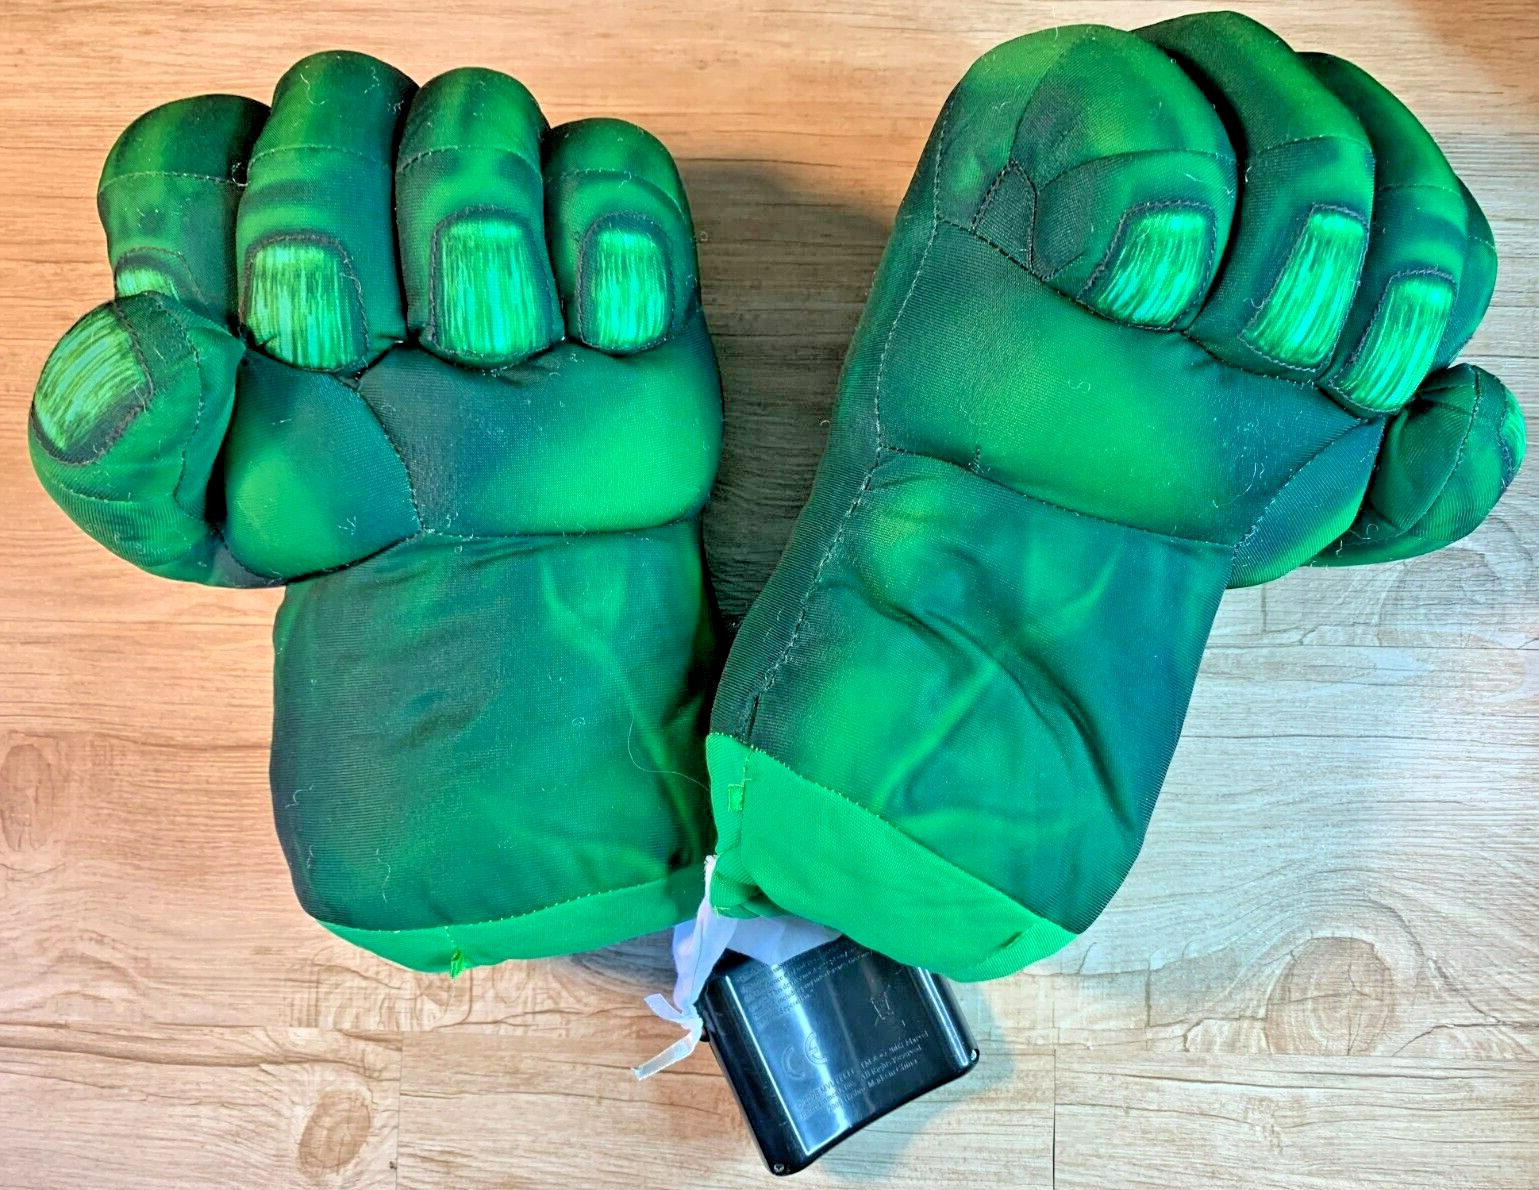 Incredible Hulk Marvel Talking Fist Smash Hands Tested And Working, Superhero - £27.75 GBP